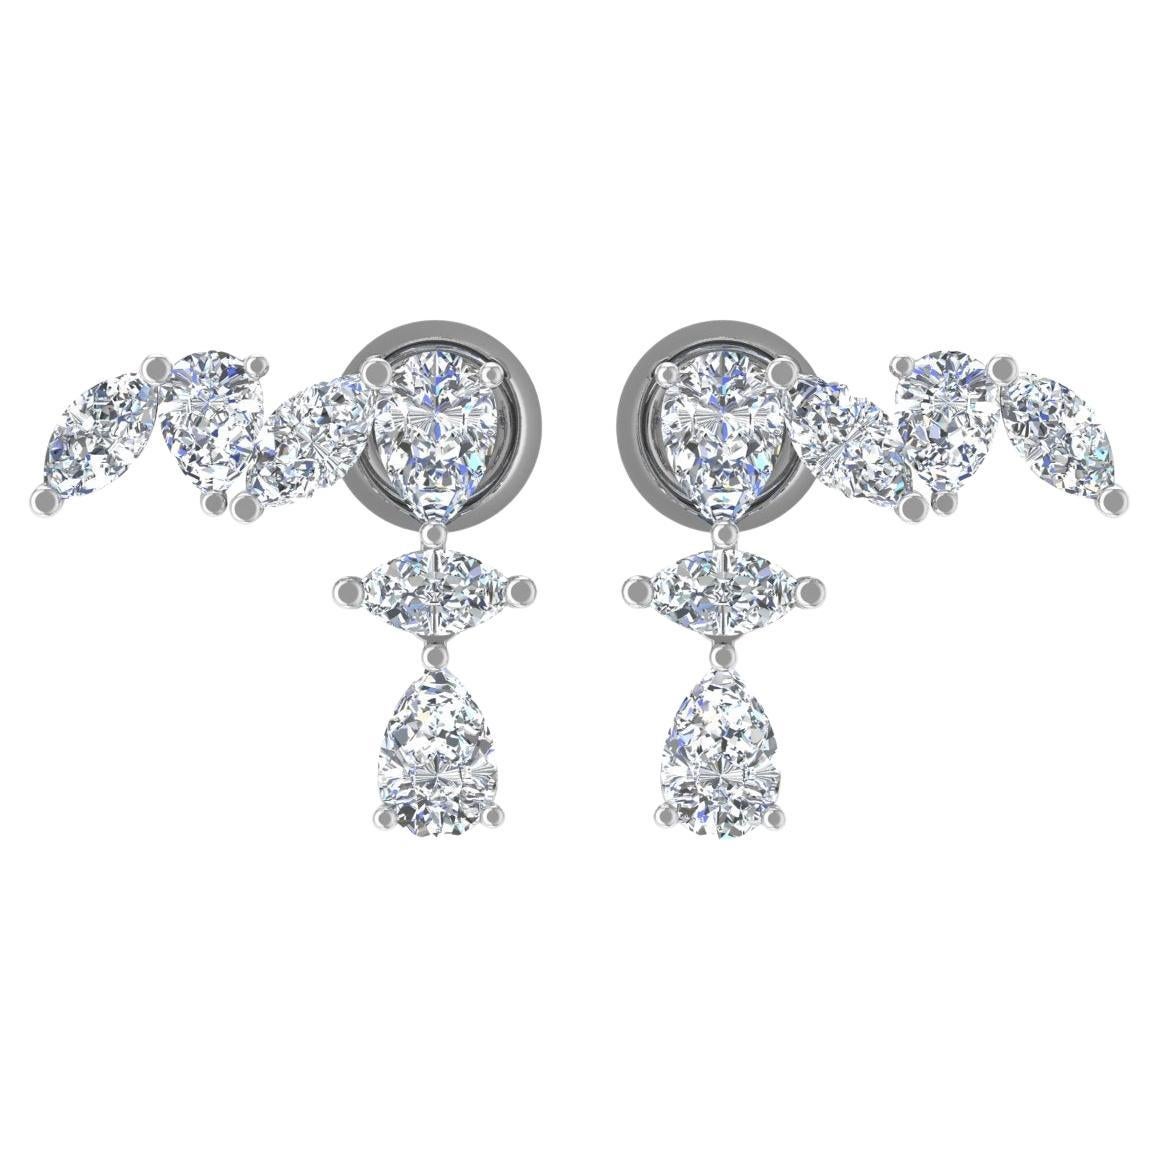 Natural 2.91 Carat Marquise & Pear Diamond Earrings 18 Karat White Gold Jewelry For Sale